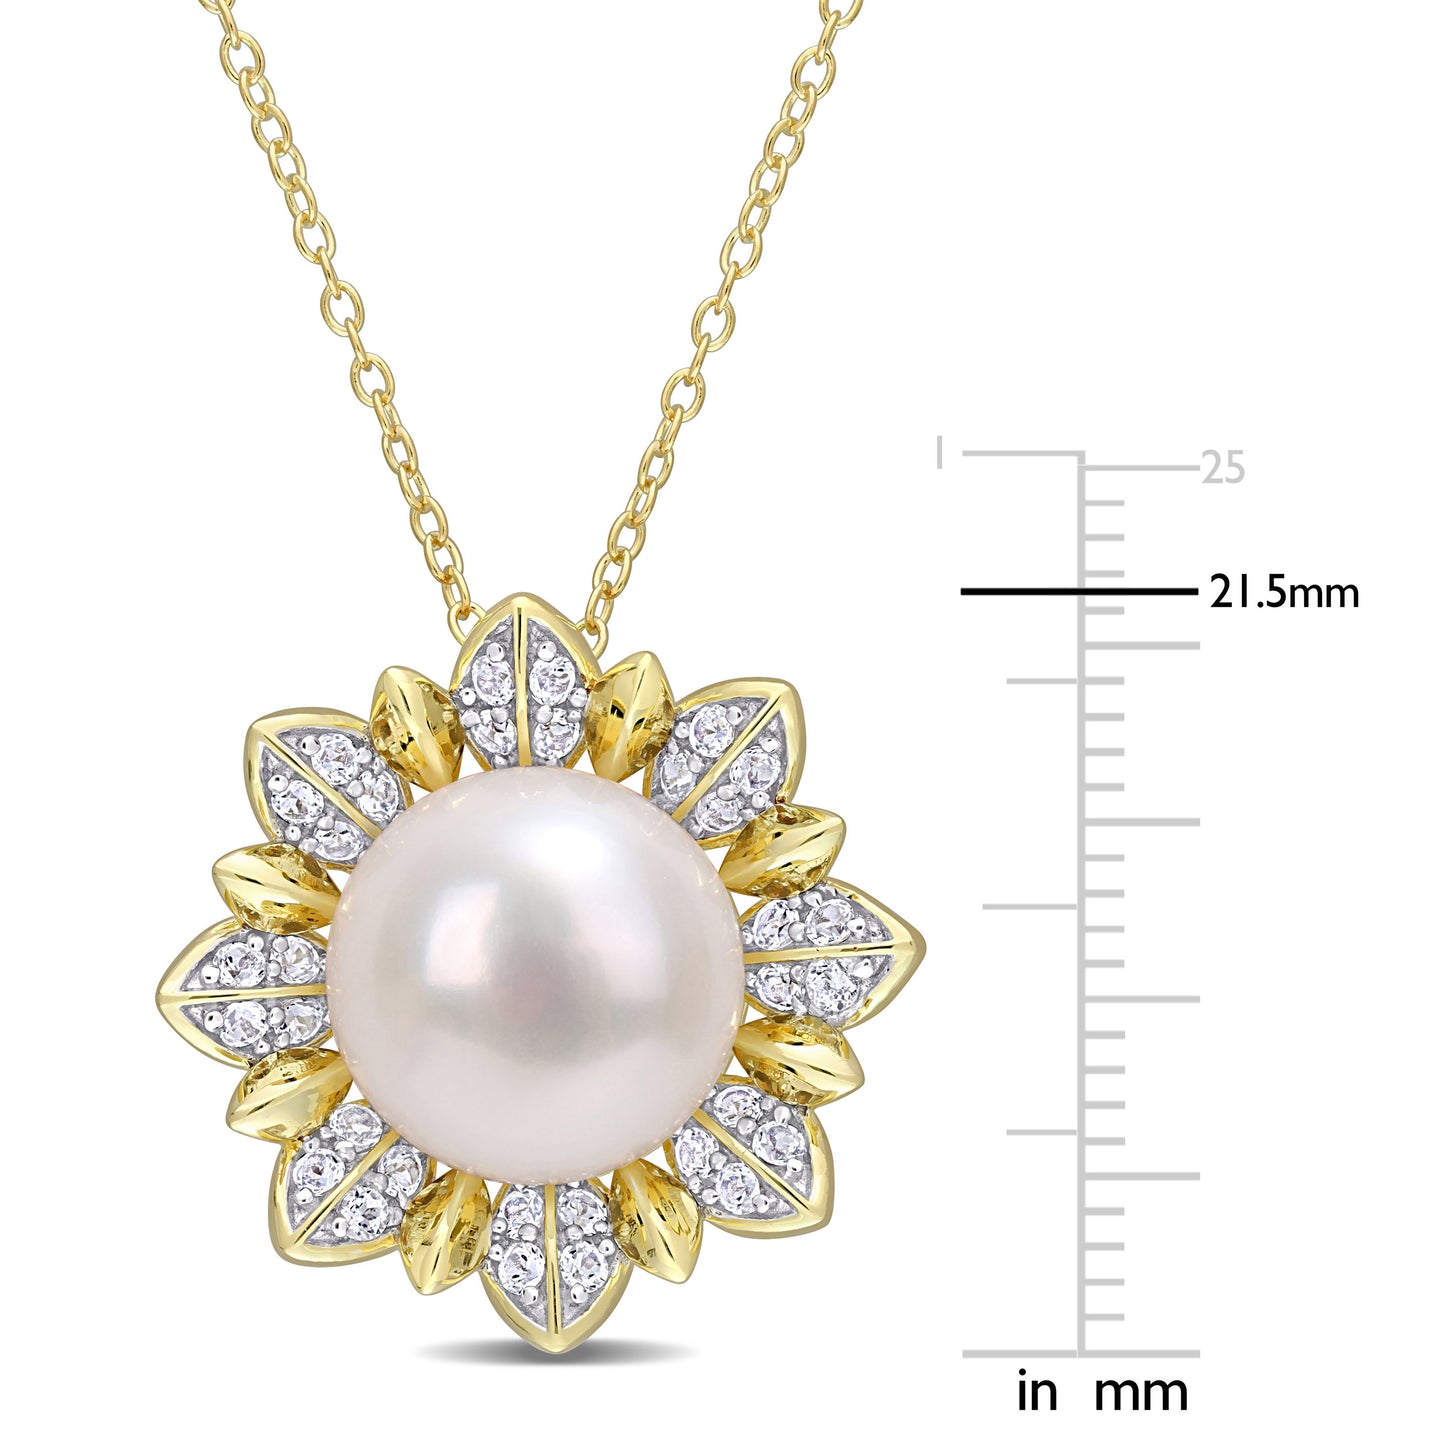 Pearl & White Topaz Flower Necklace in Yellow Silver